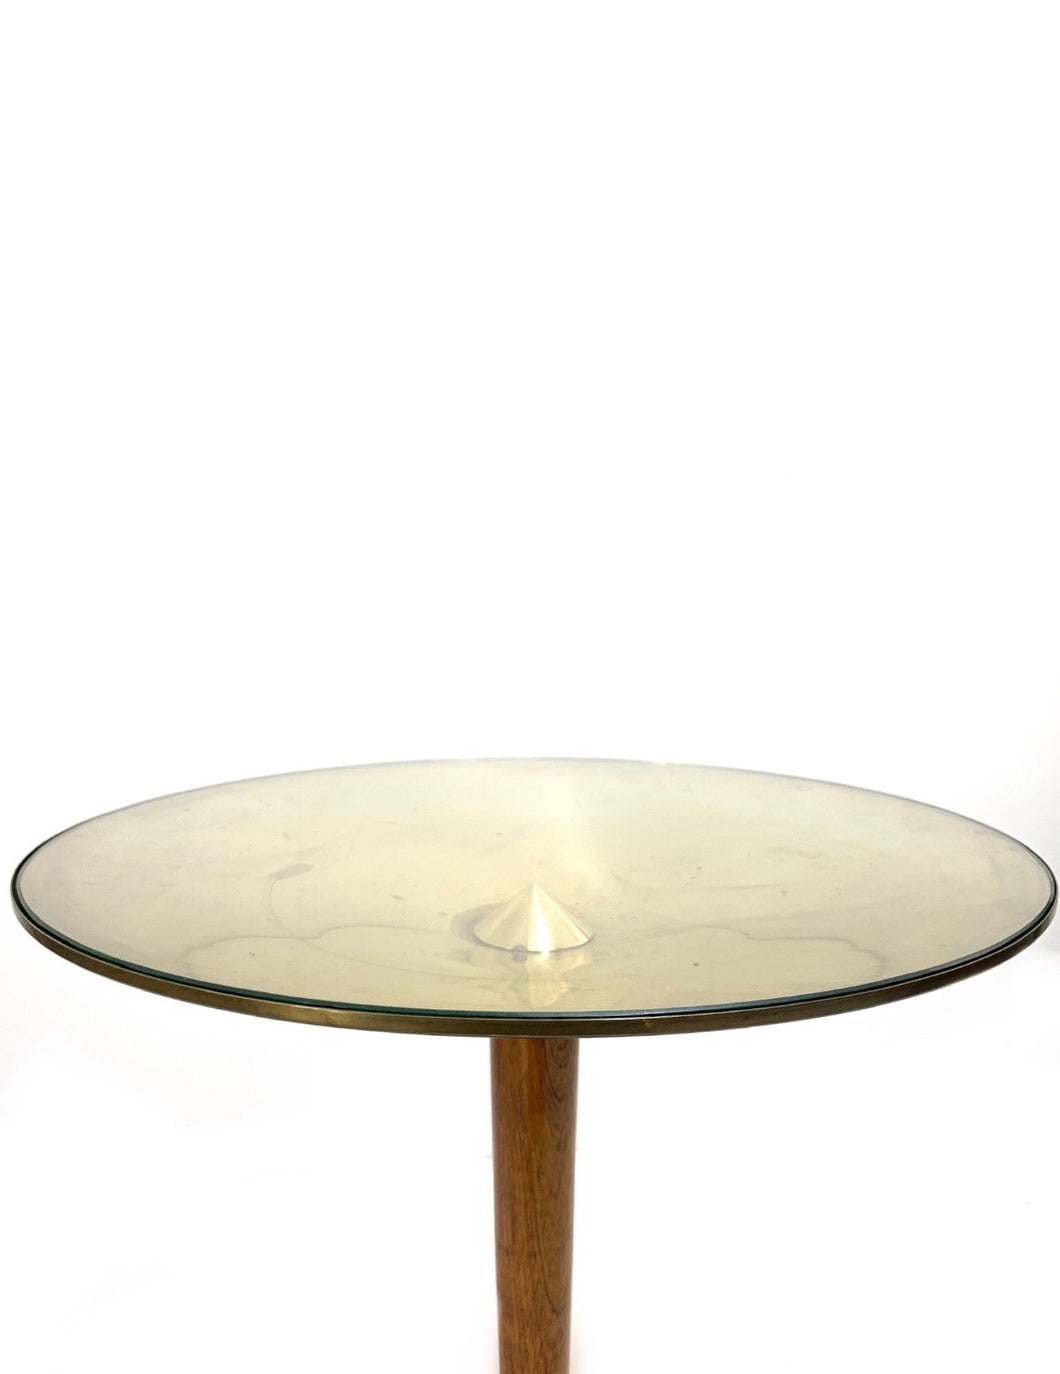 MIDCENTURY OCCASIONAL TABLE GLASS IN BRASS AND WALNUT